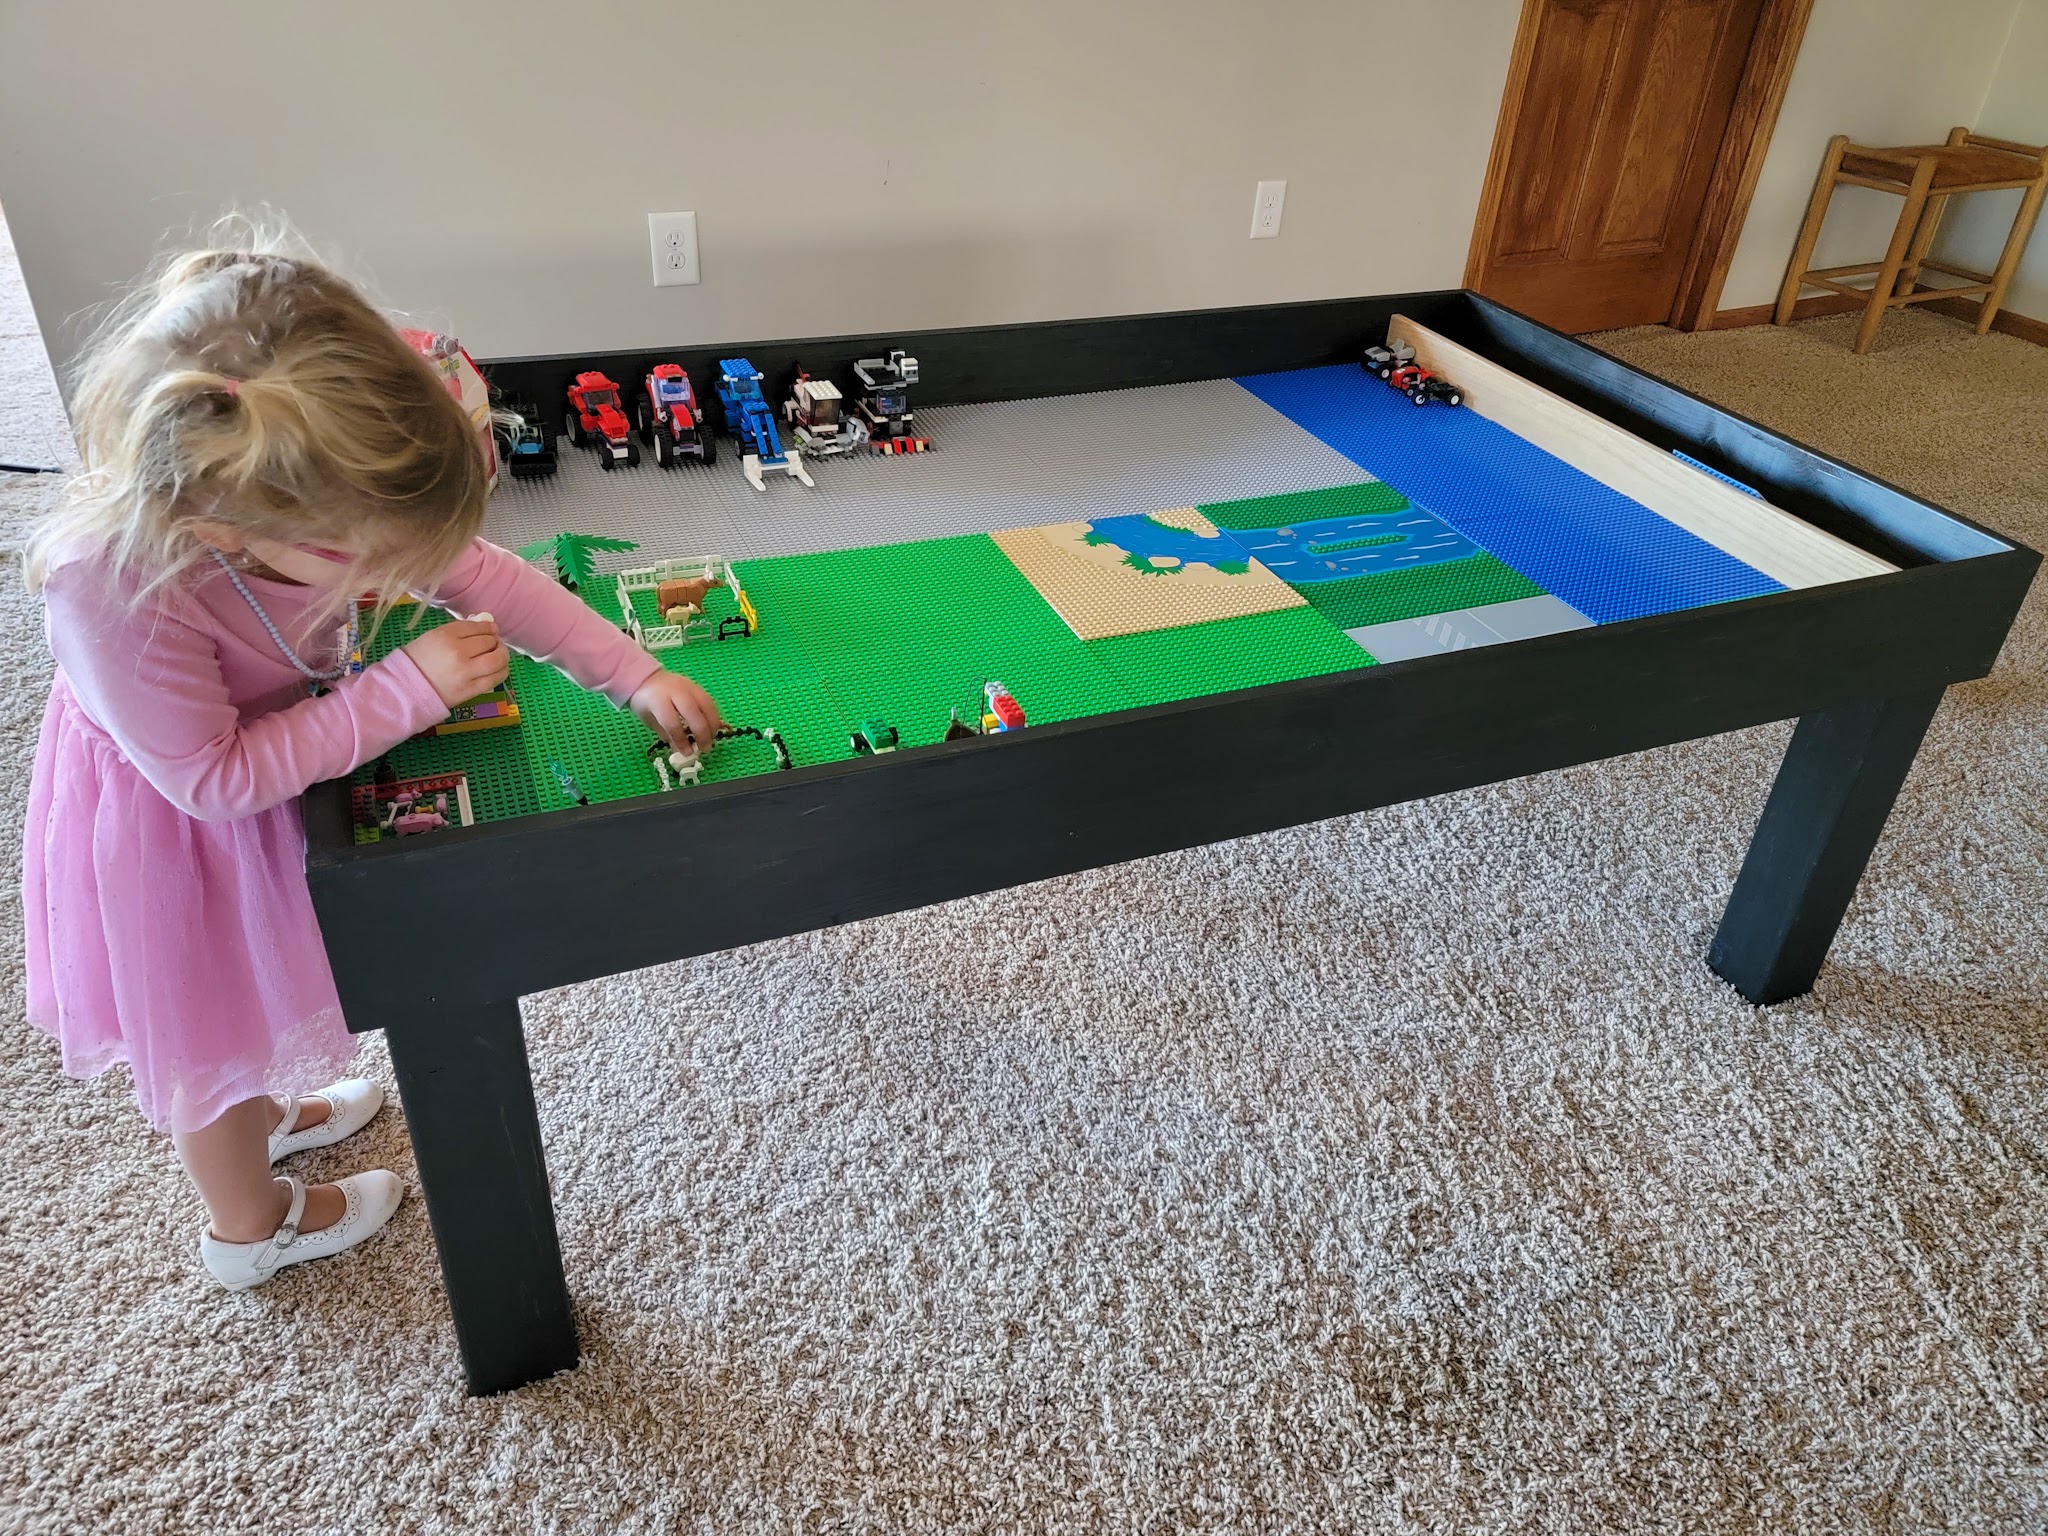 DIY Lego table. Used liquid nails to glue Lego base to old end